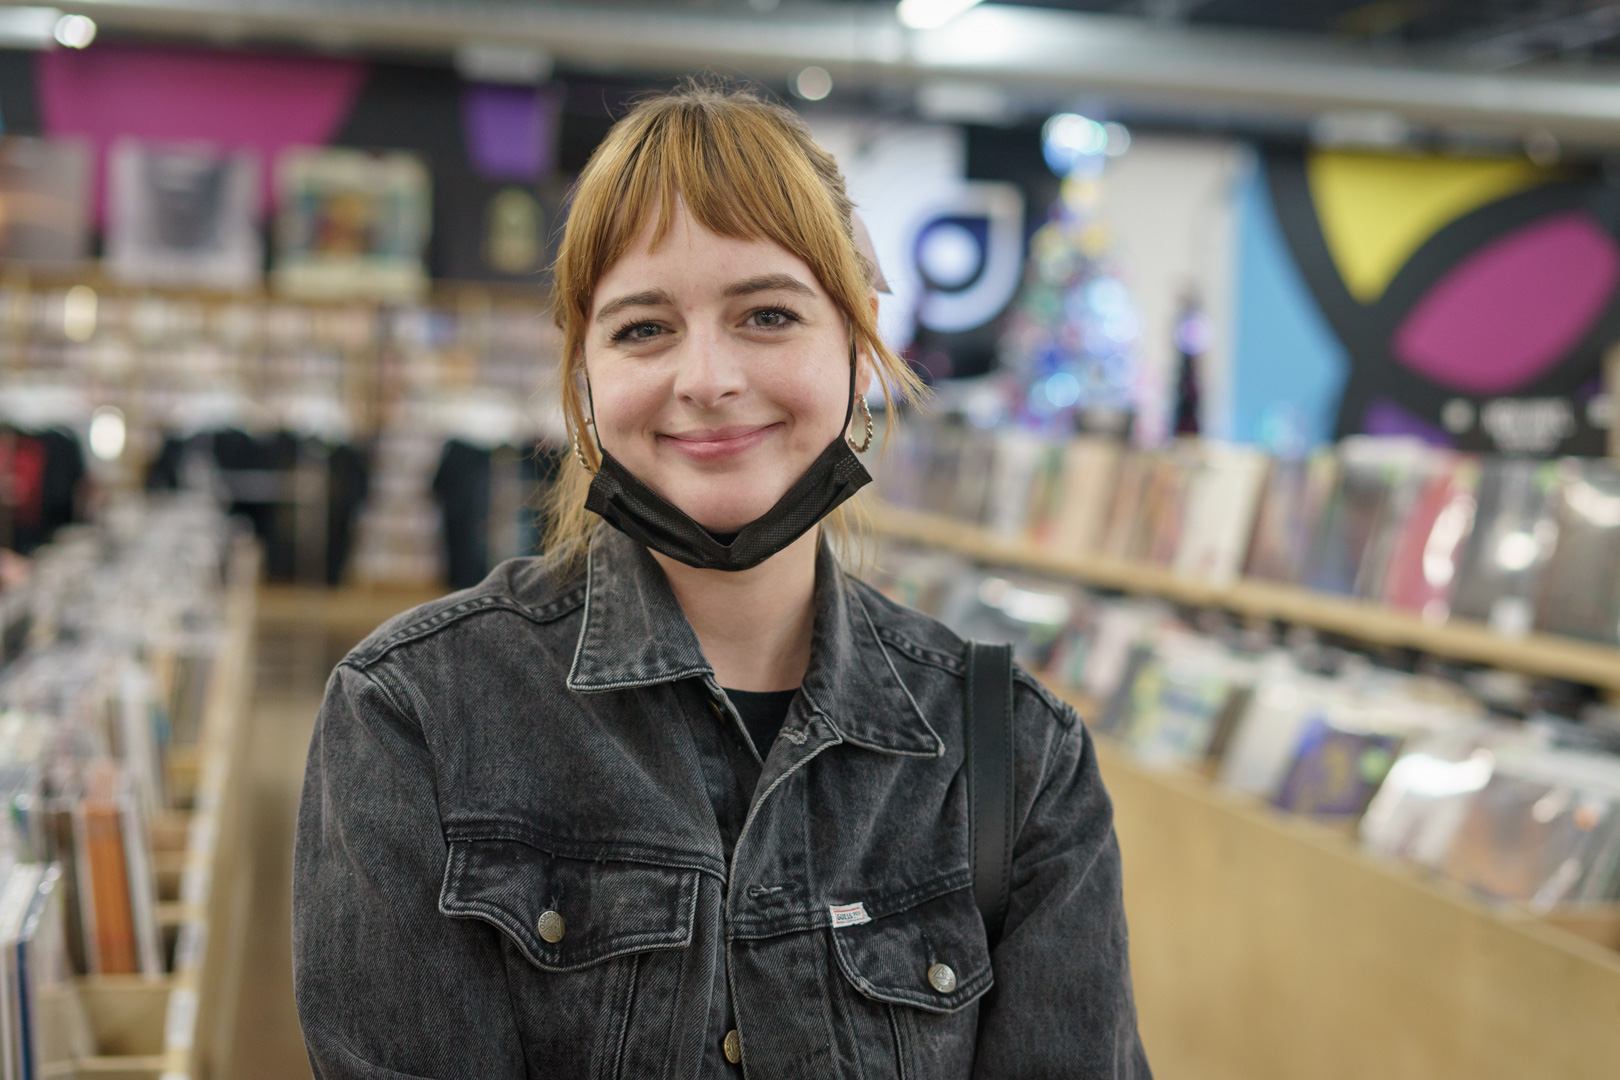 A red haired woman in a black denim jacket smiles in a record store.